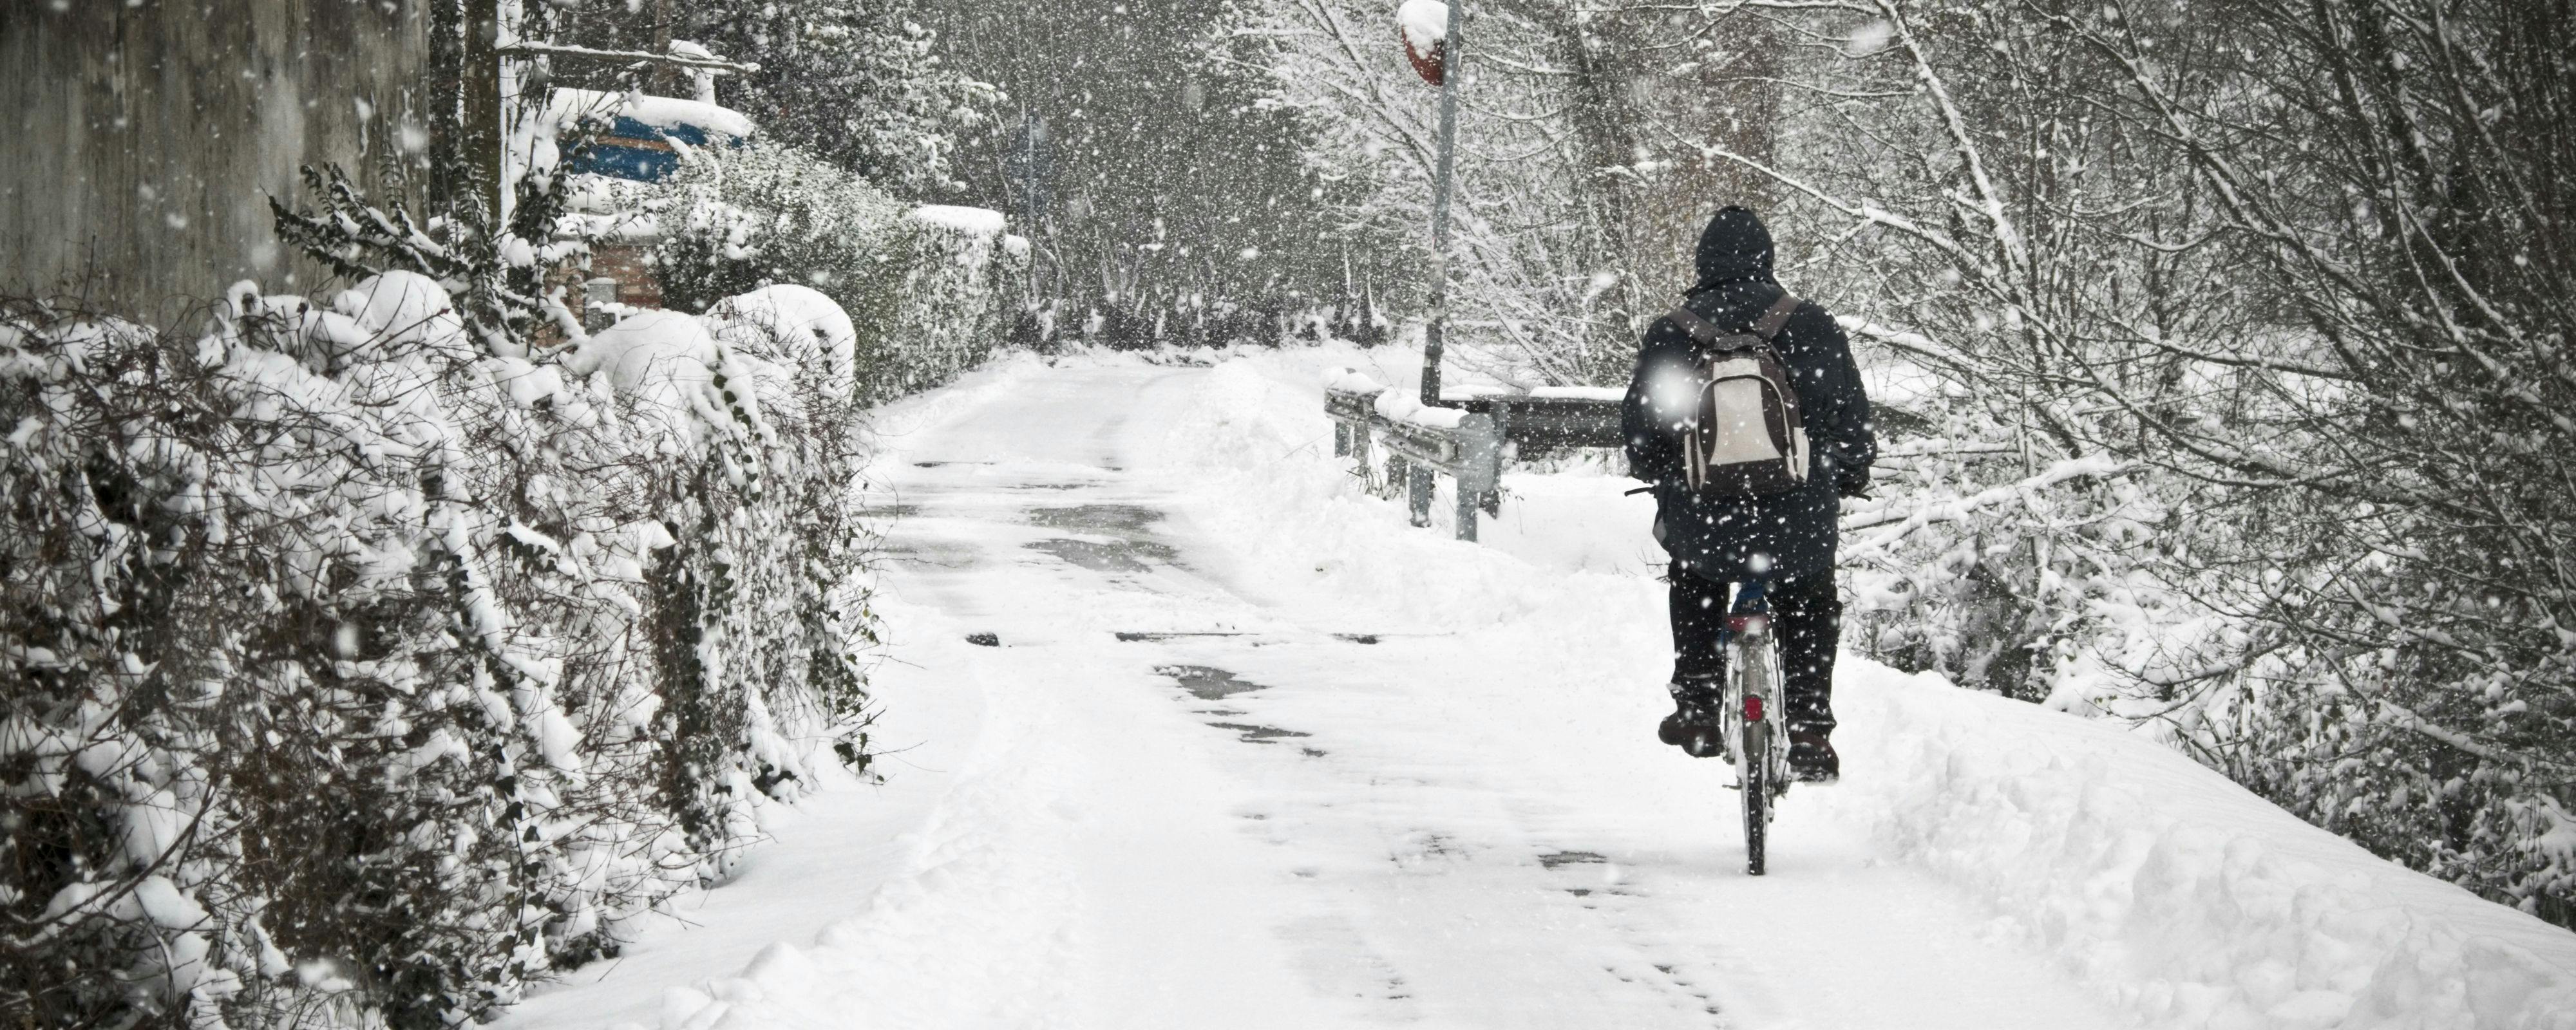 How to get ready for winter bike riding